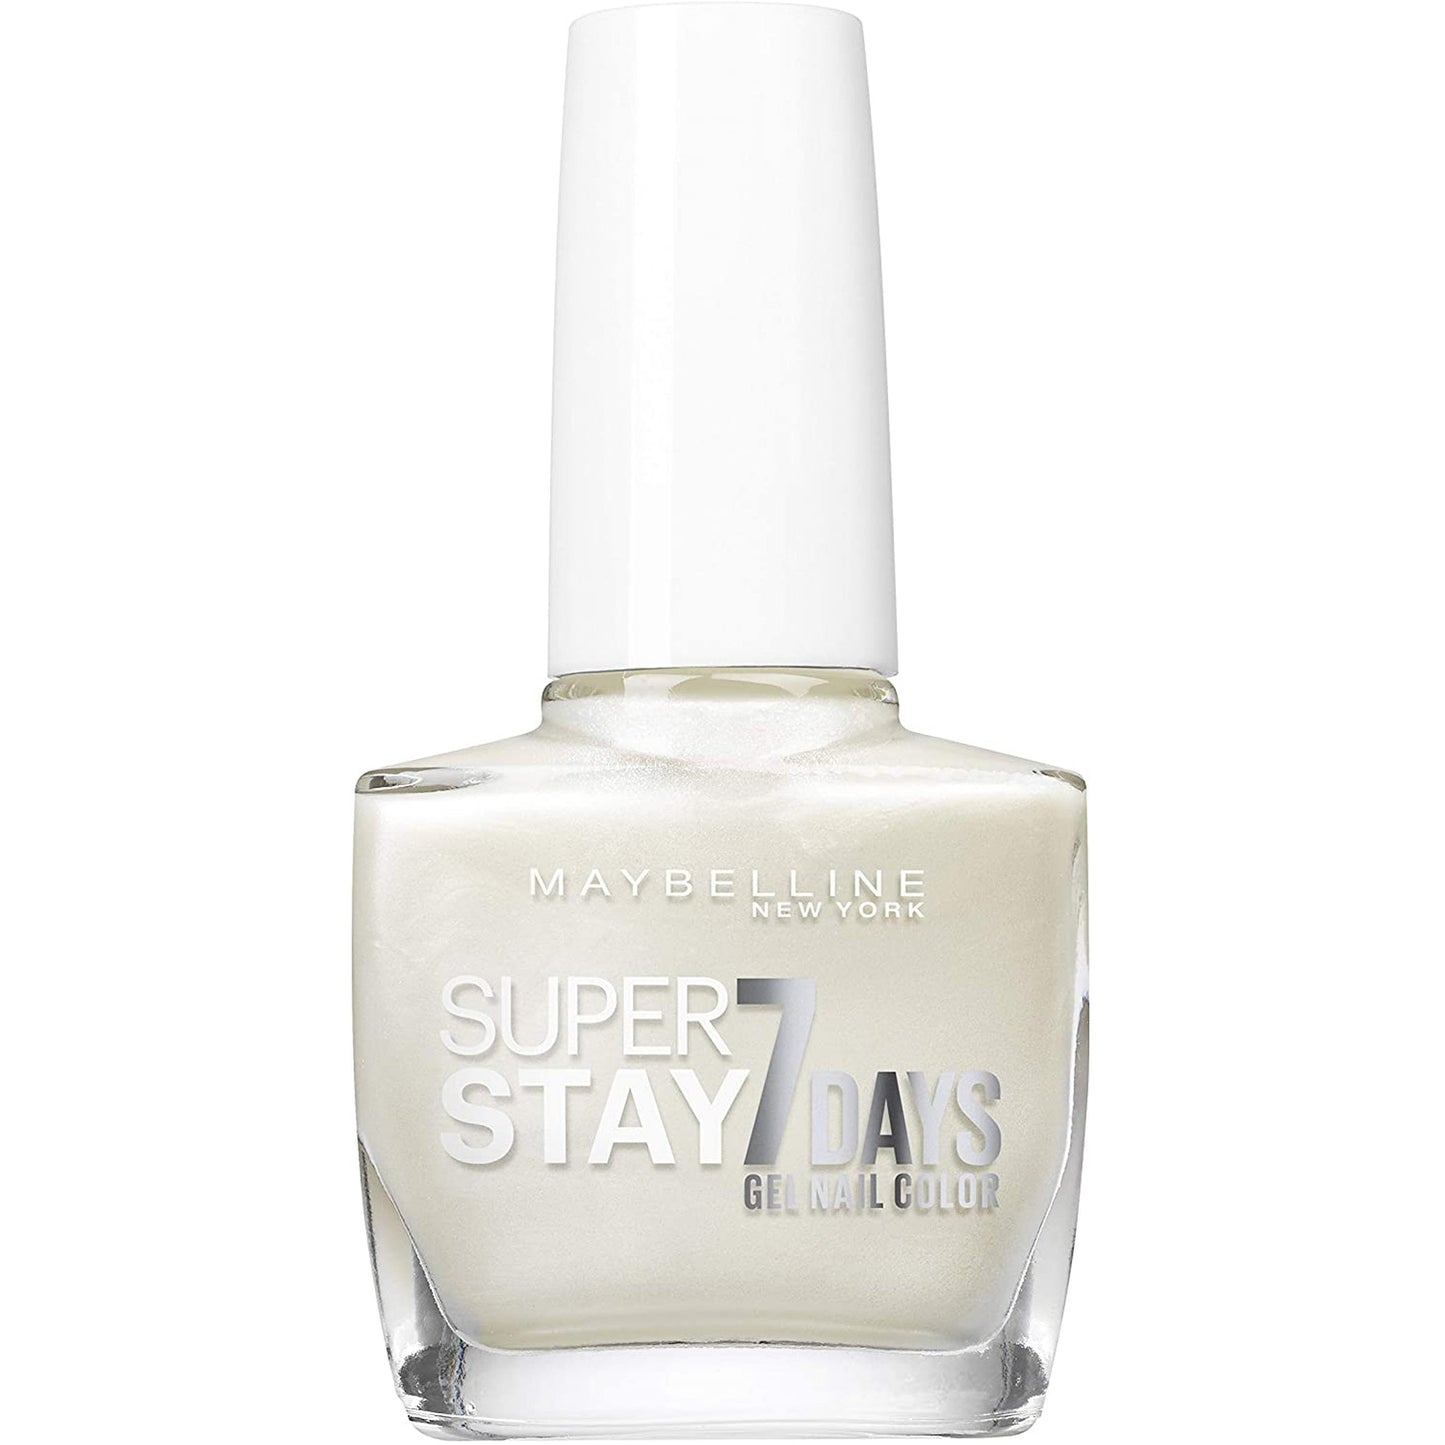 Pearly 77 Polish Super Nail White Maybelline Gel Days – Stay 7